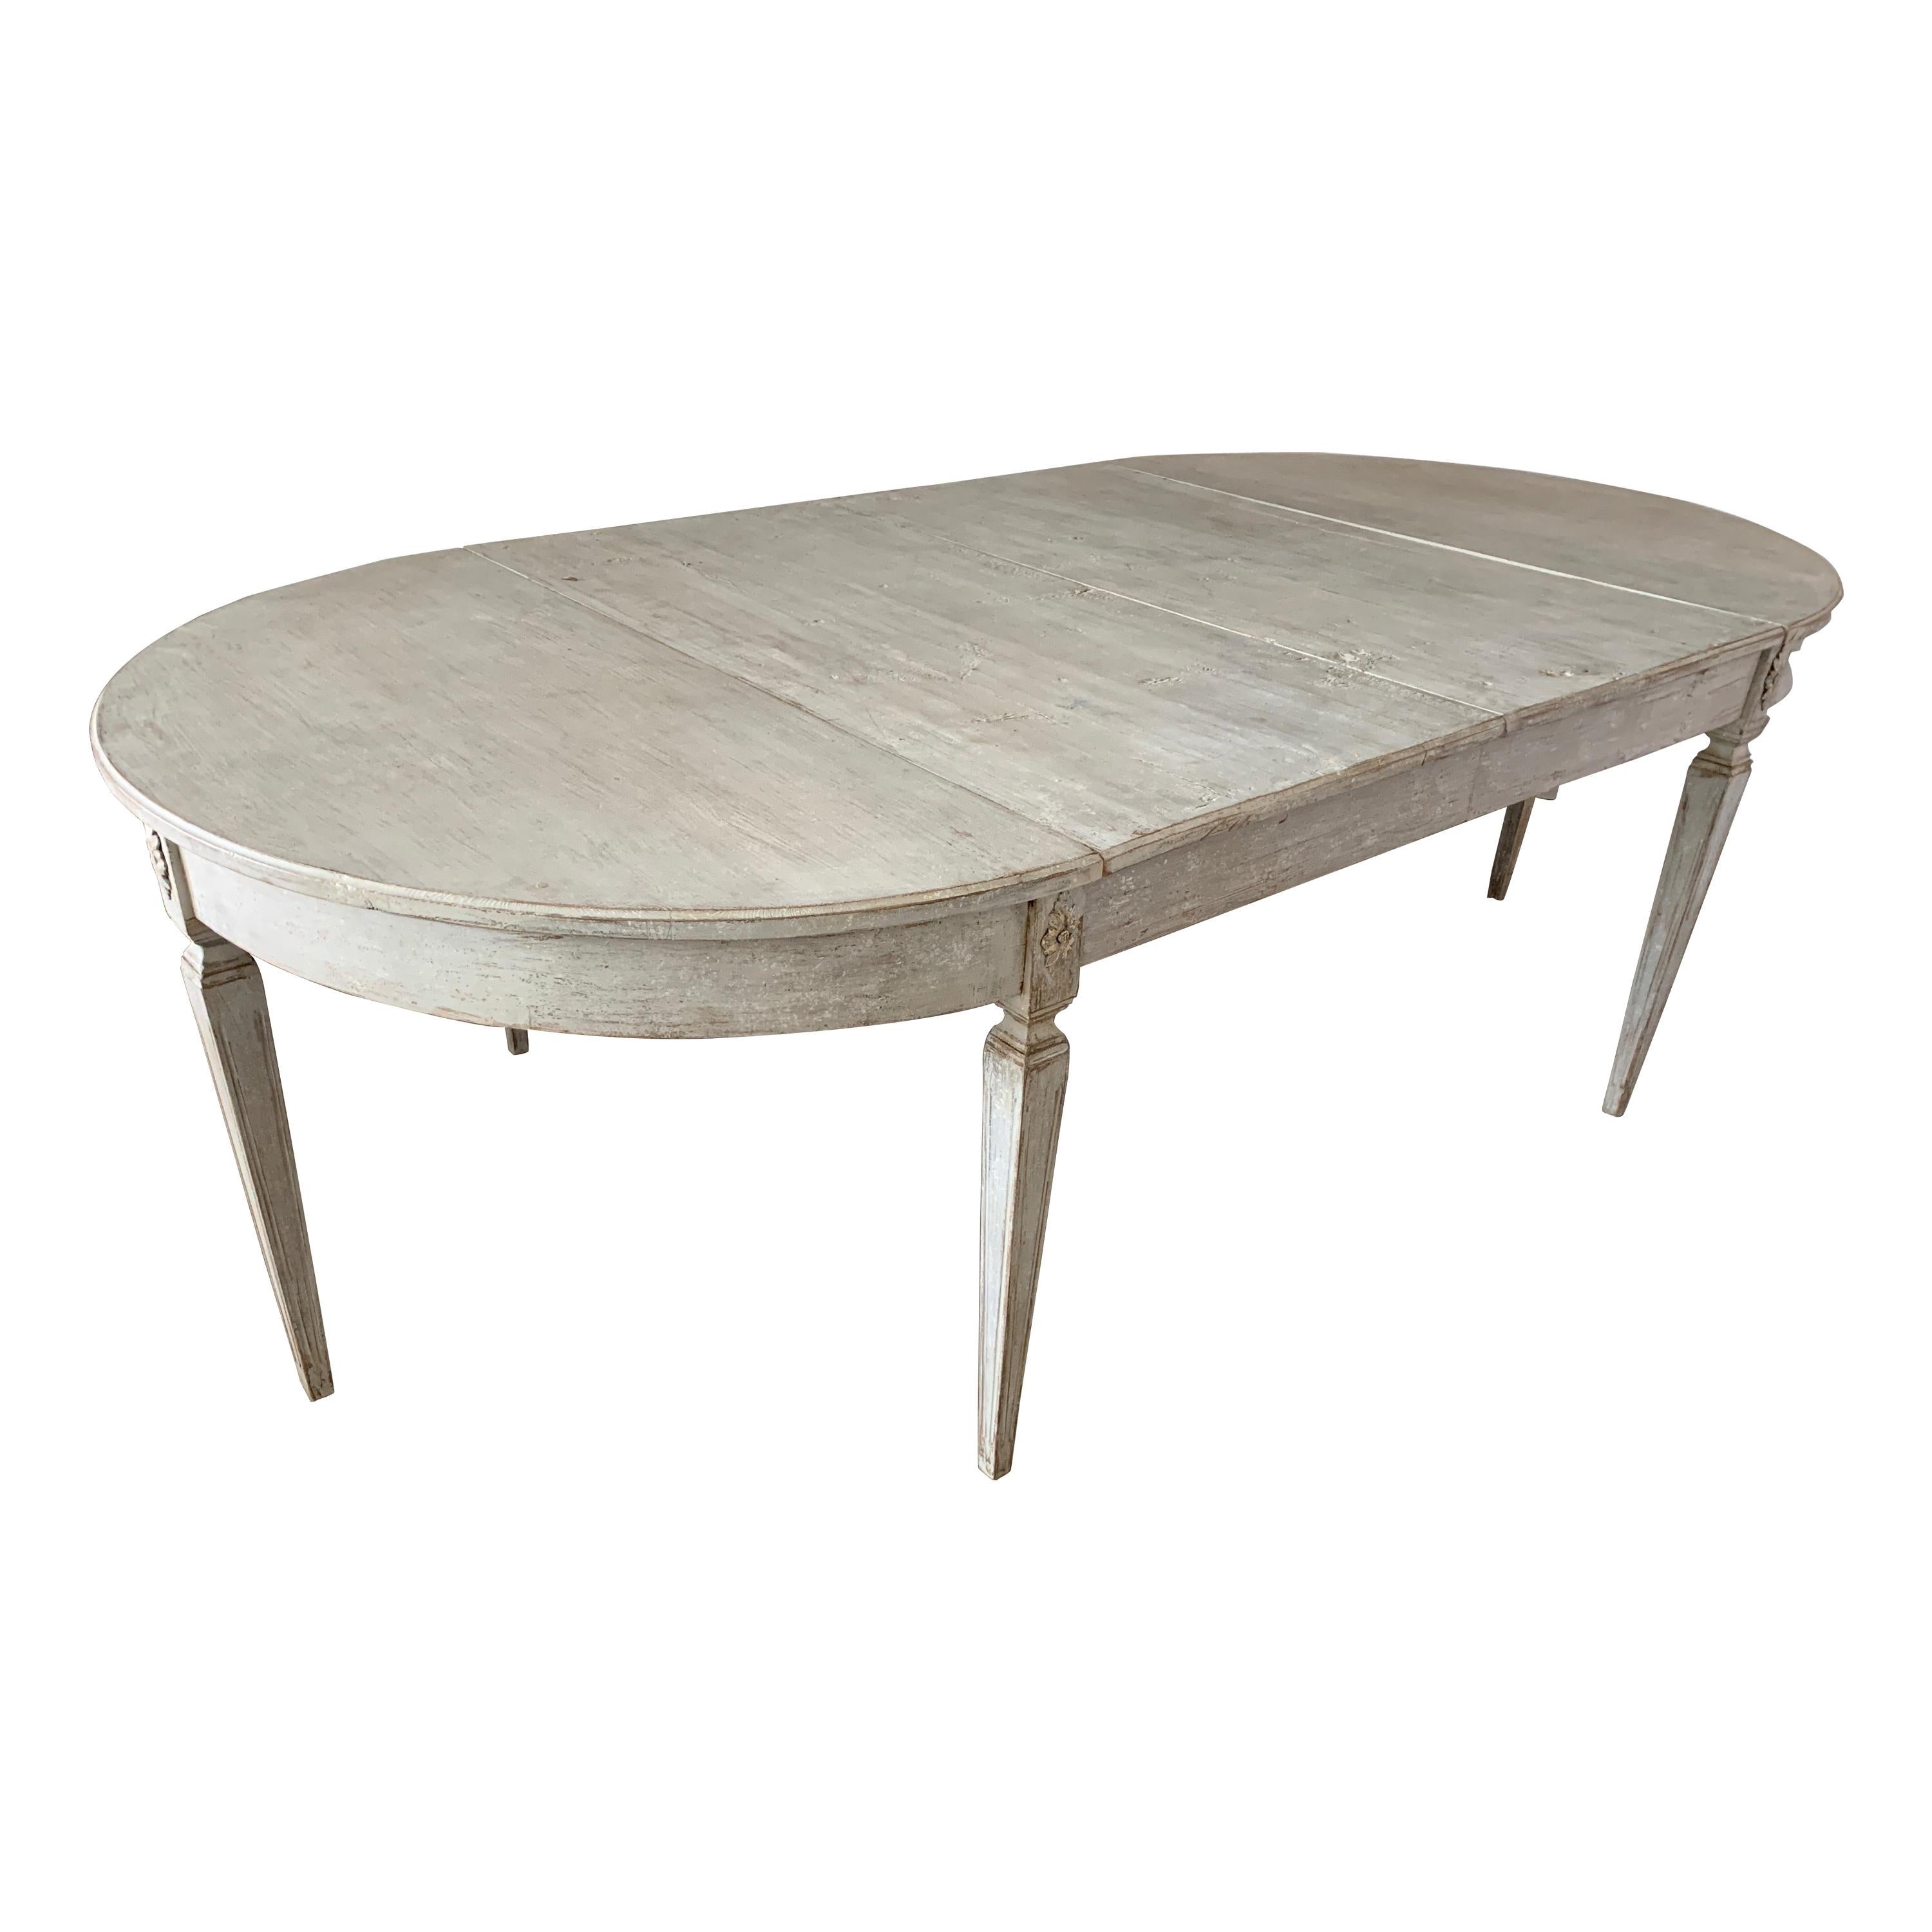 Swedish Gustavian Extension Table Painted Gray with Demilune Ends